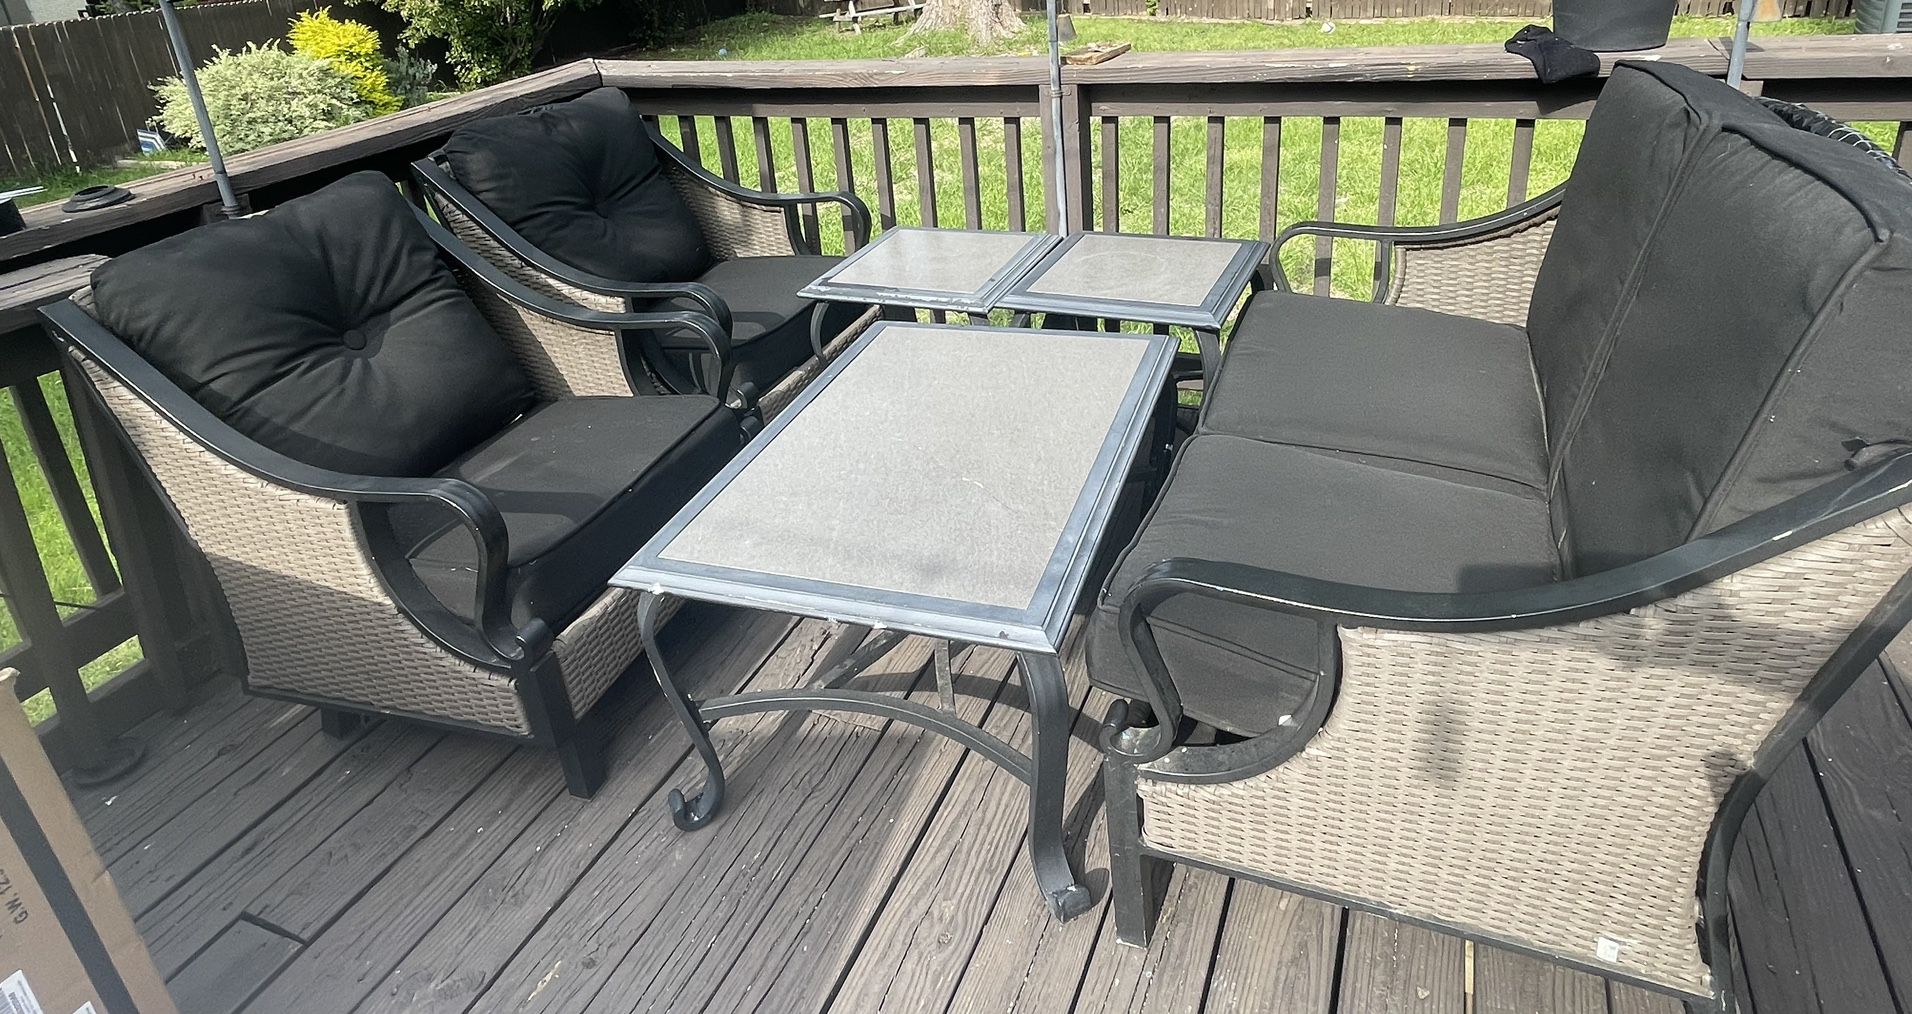 Patio Furniture- Loveseat, Chairs, Tables, and Seat Cushions + Including 3 Protection Covers